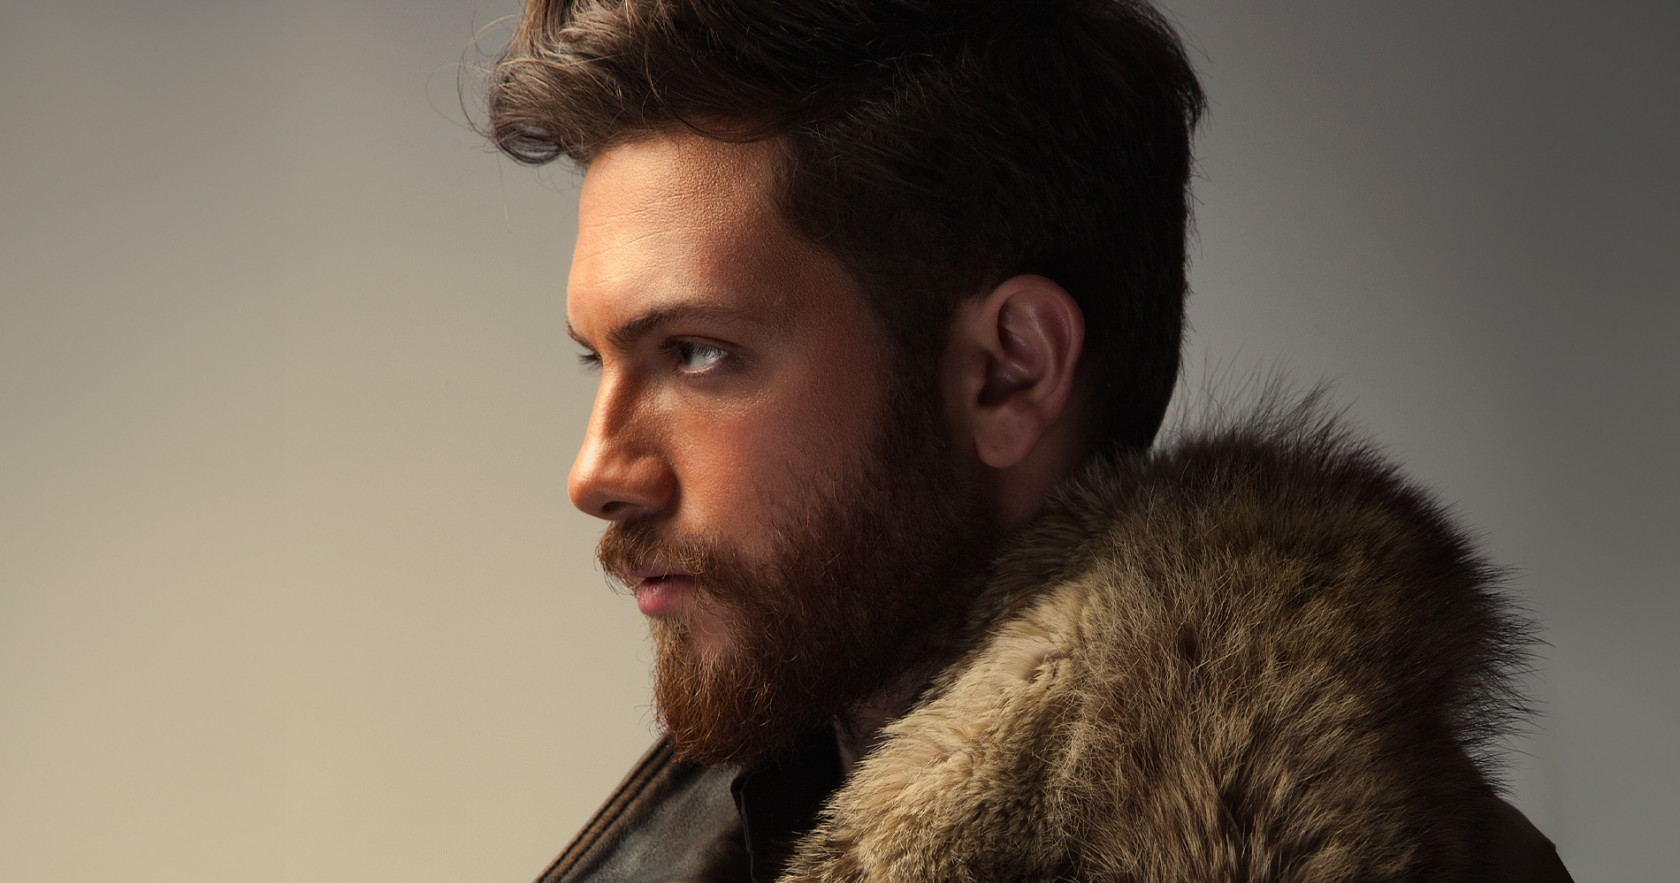 Azerbaijan: Nadir Rustemli’s entry in Eurovision 2022 will be released on March 21